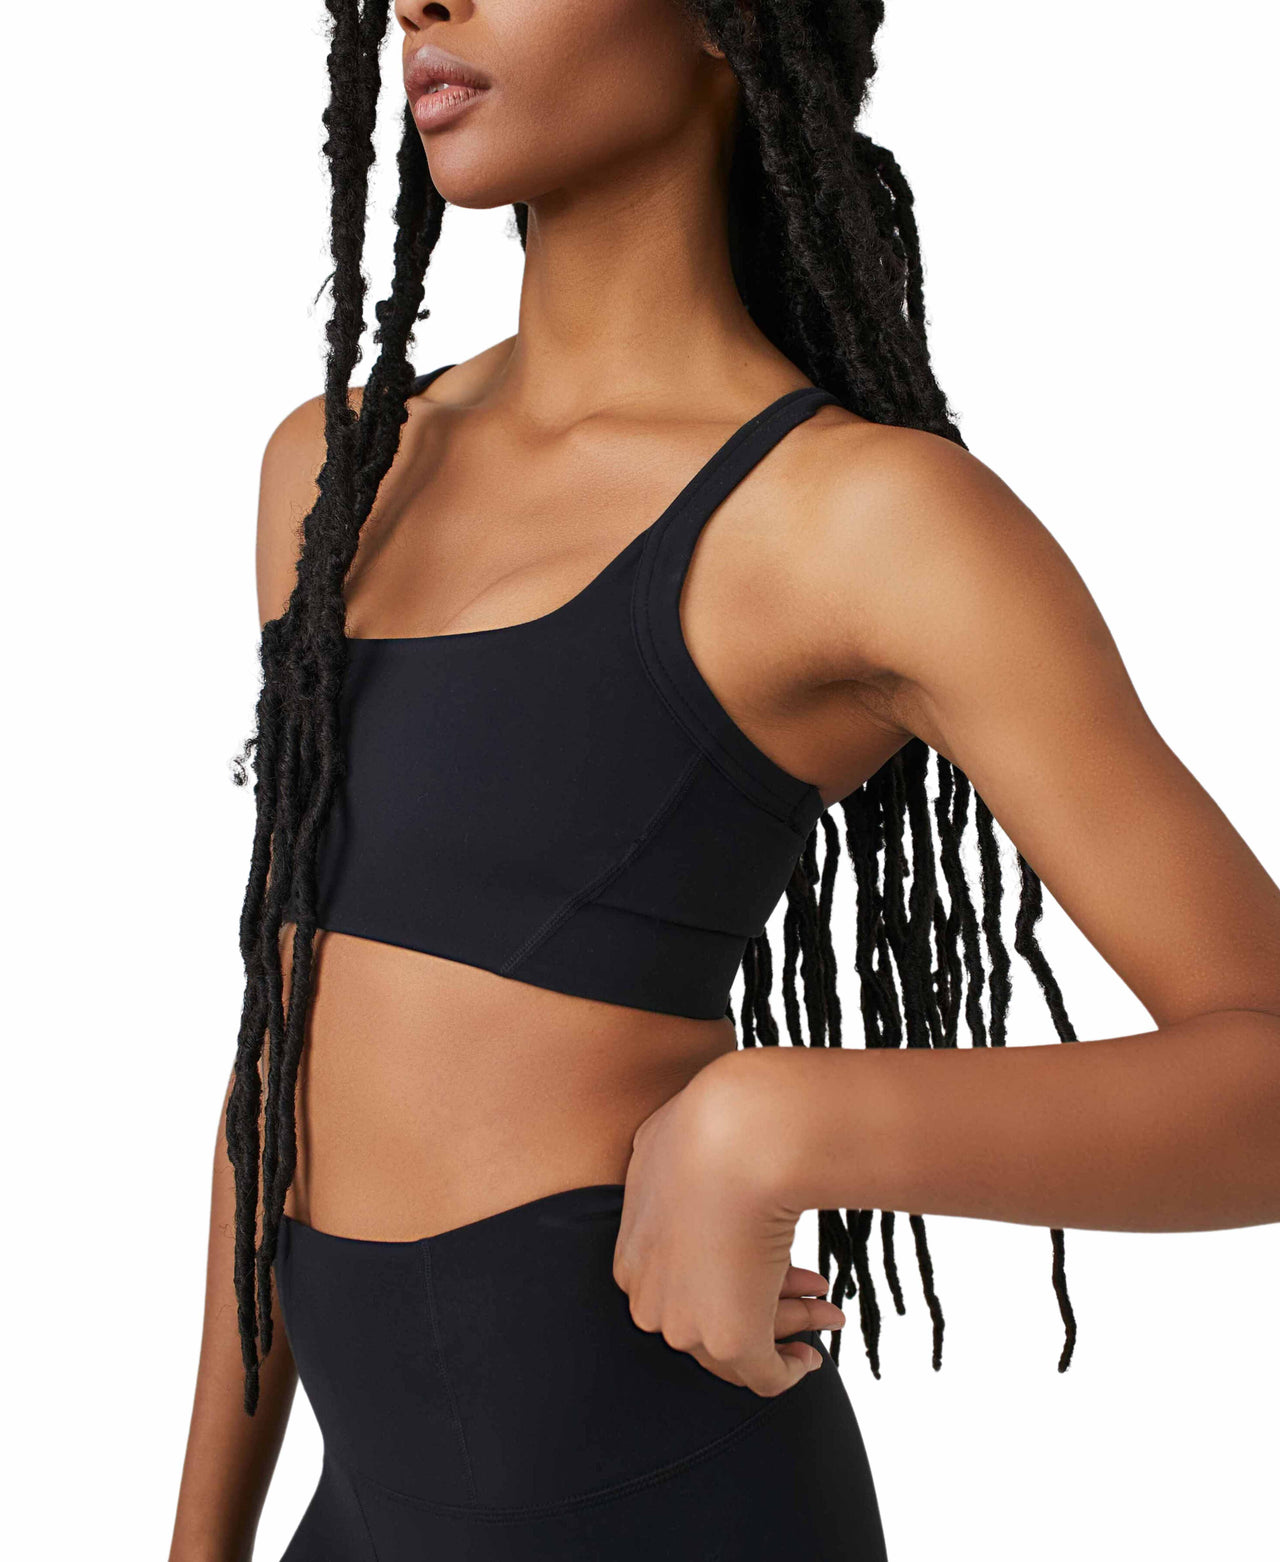 Free People Movement - Never Better Square Neck Bra